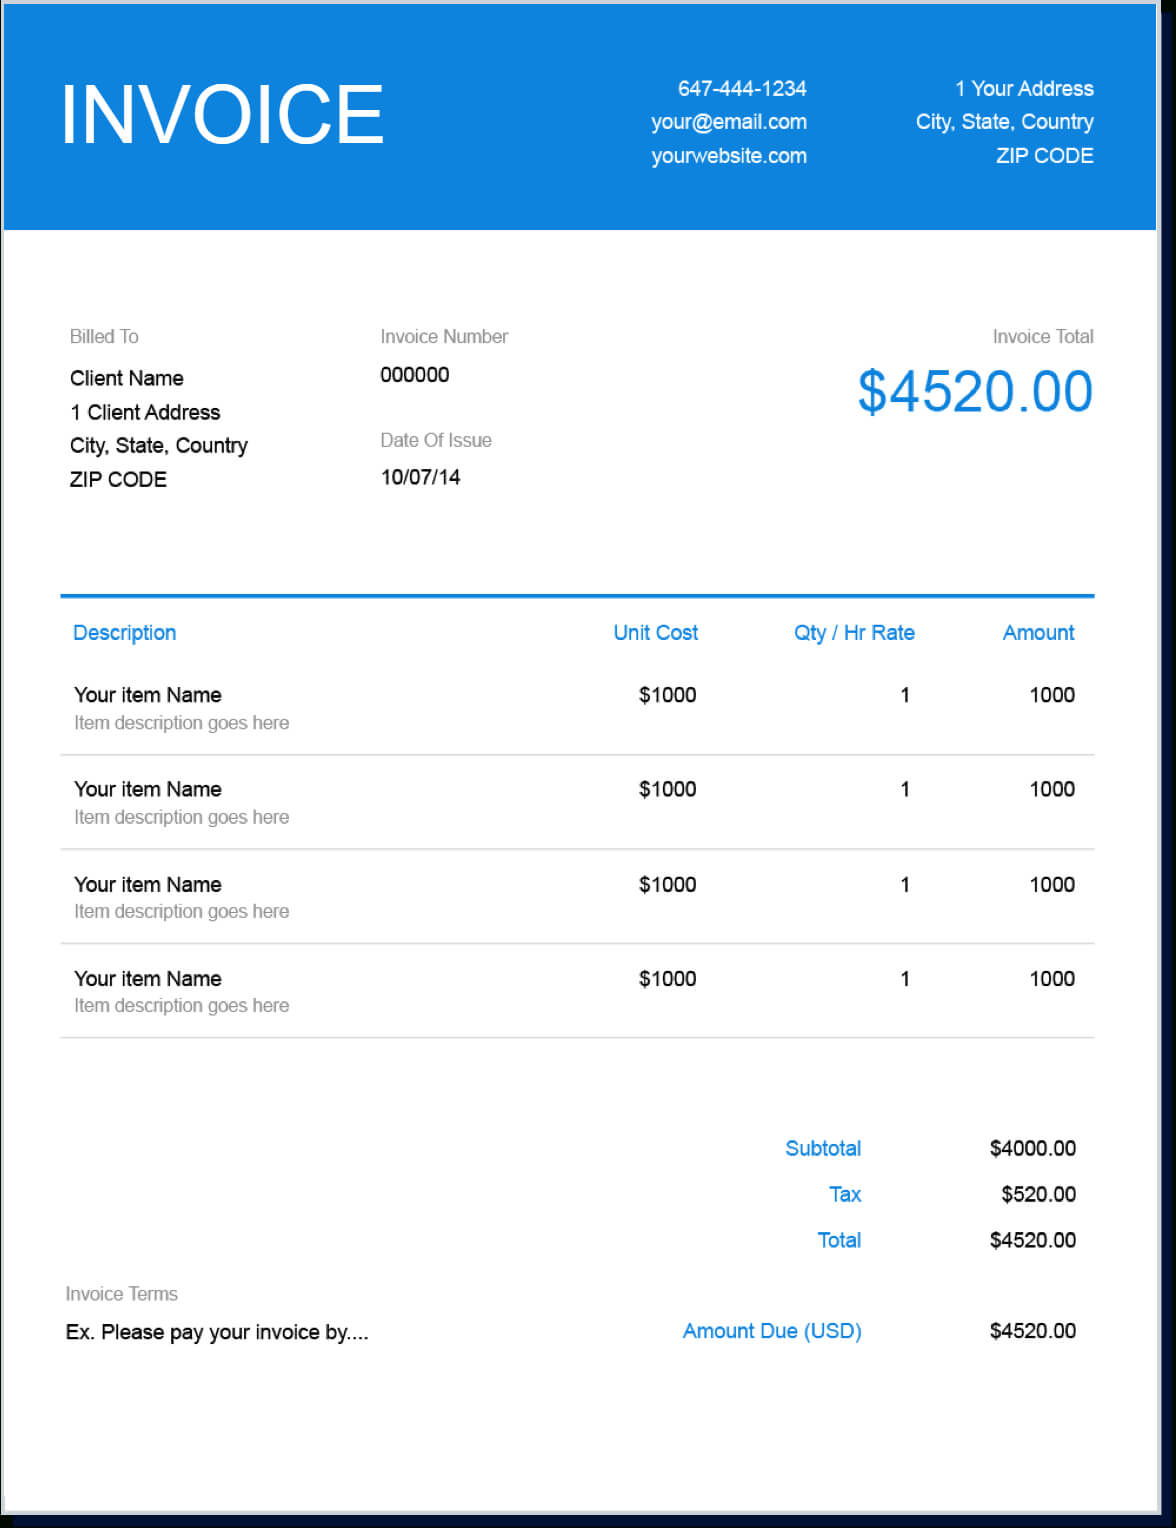 Invoice Template | Send In Minutes | Create Free Invoices Regarding Free Downloadable Invoice Template For Word